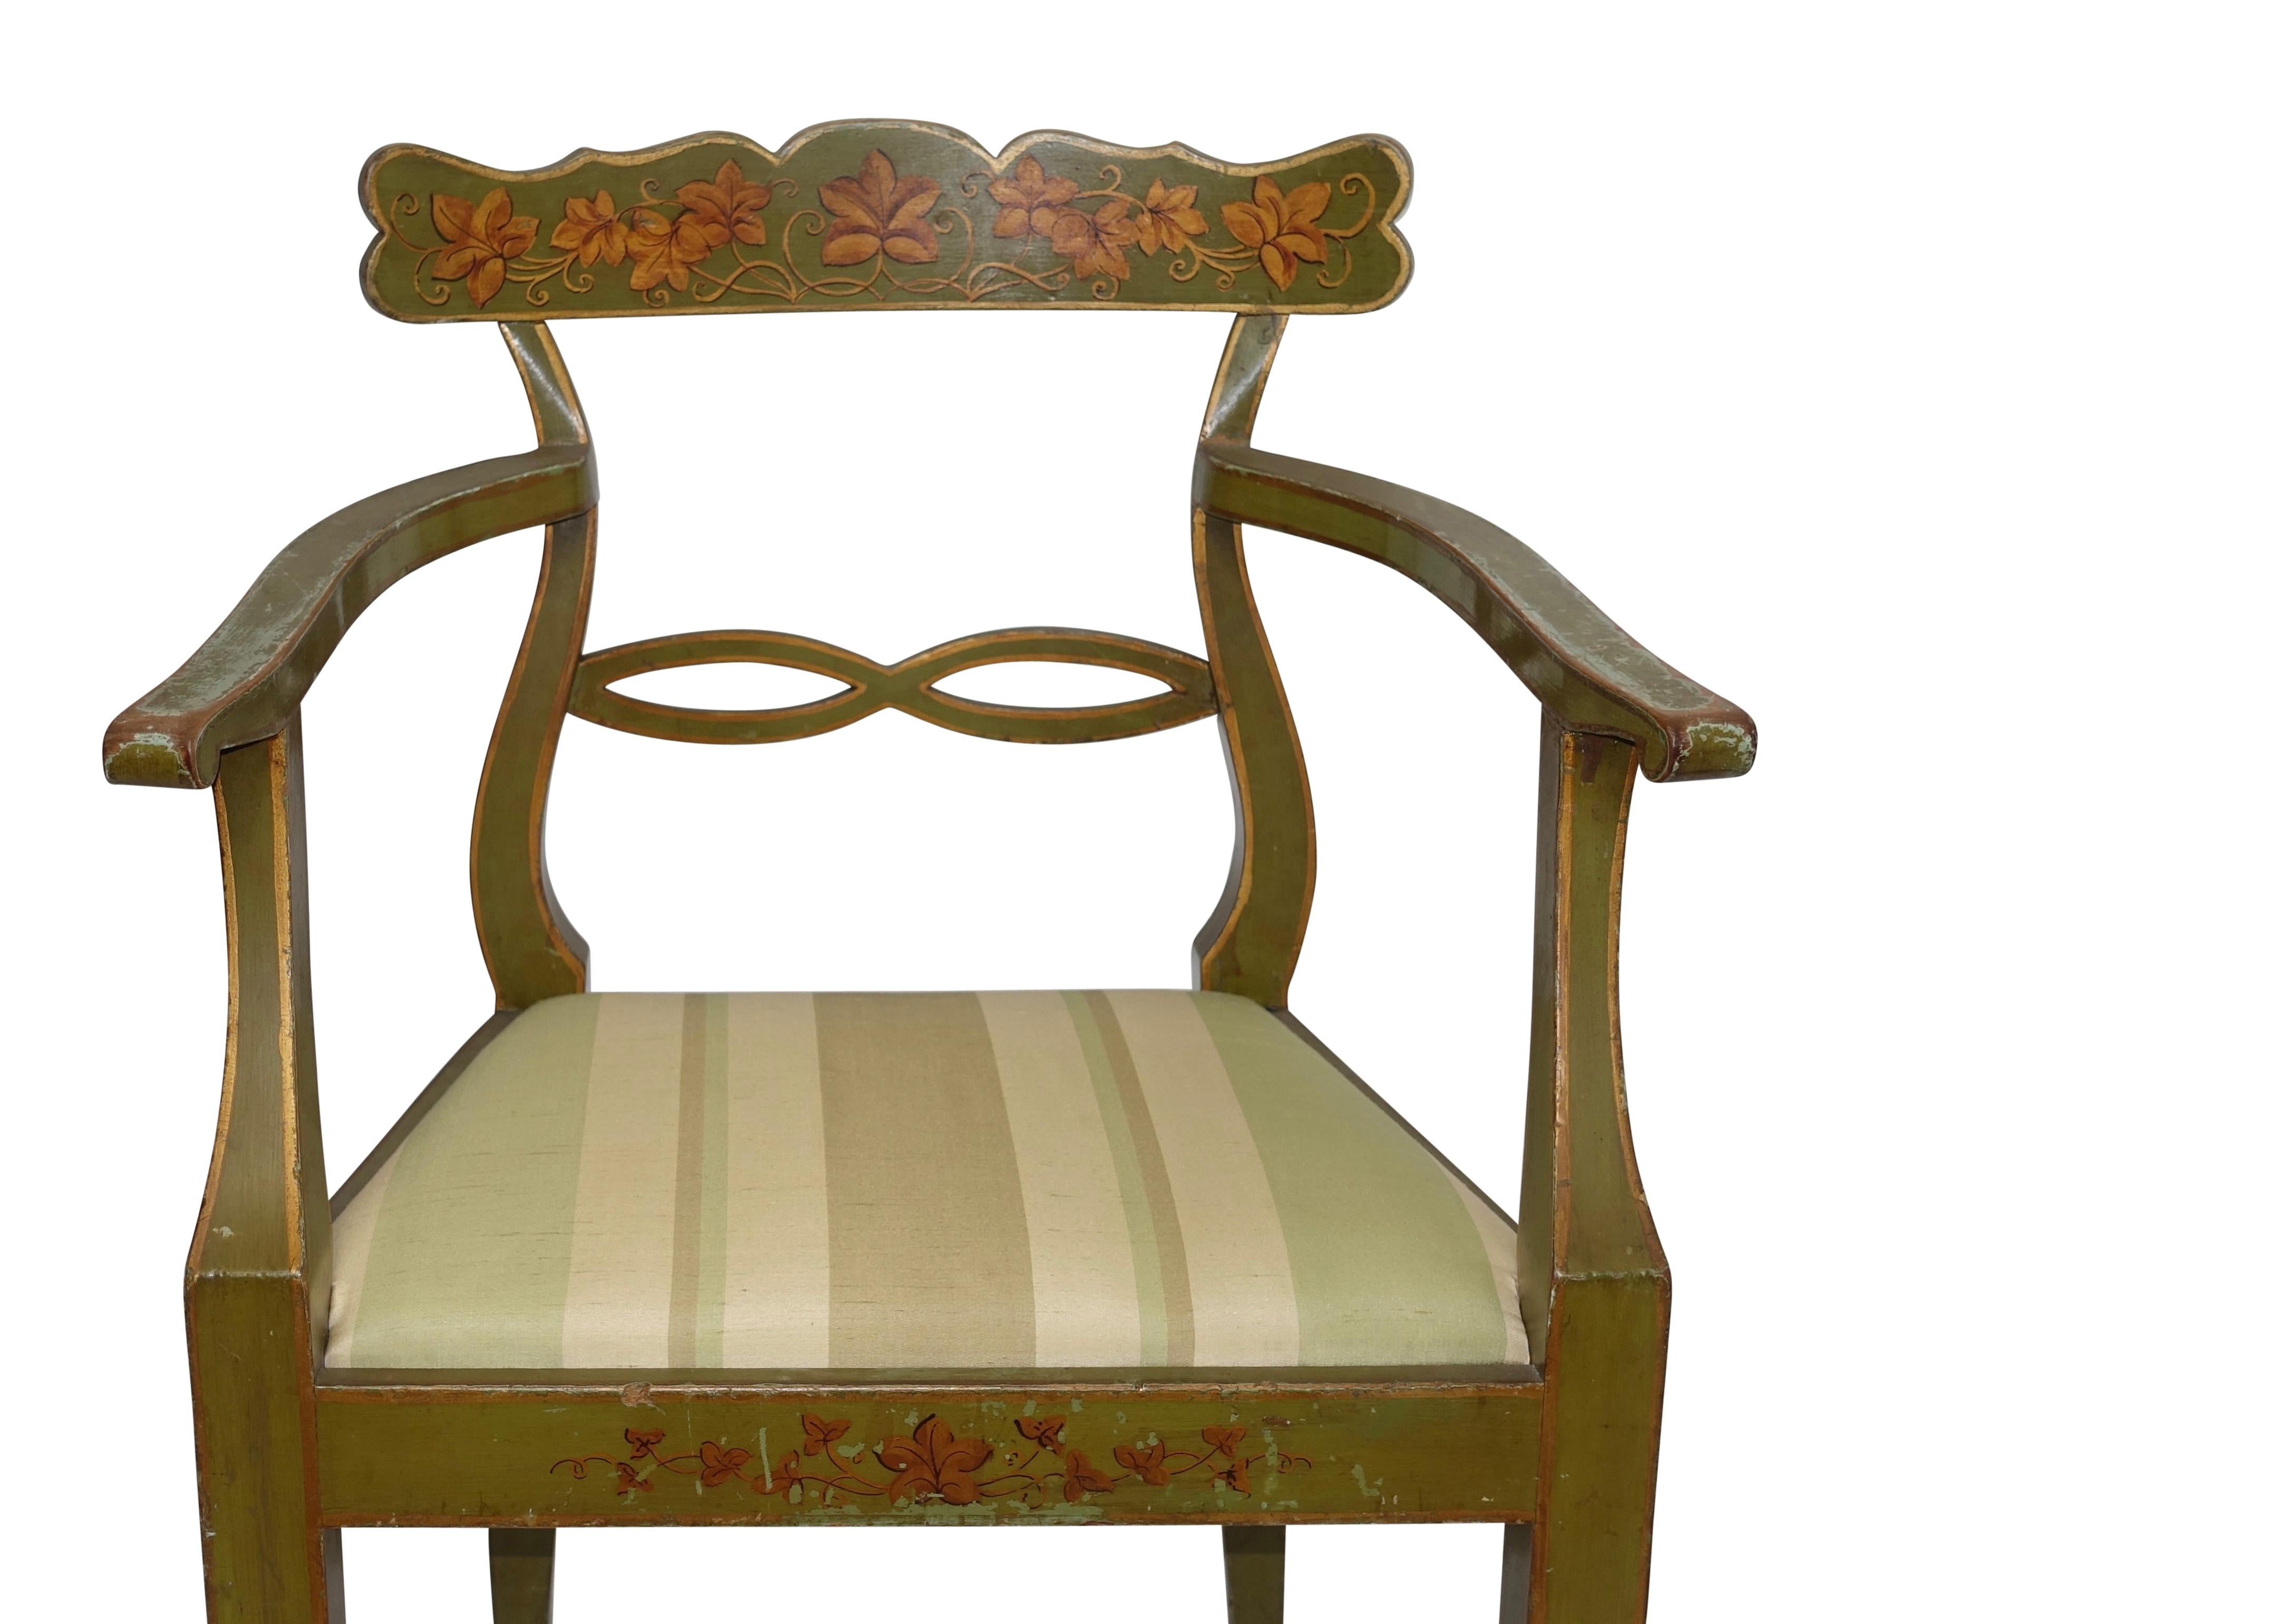 Four Green Painted Armchairs with Trailing Ivy, Northern European, 19th Century For Sale 2